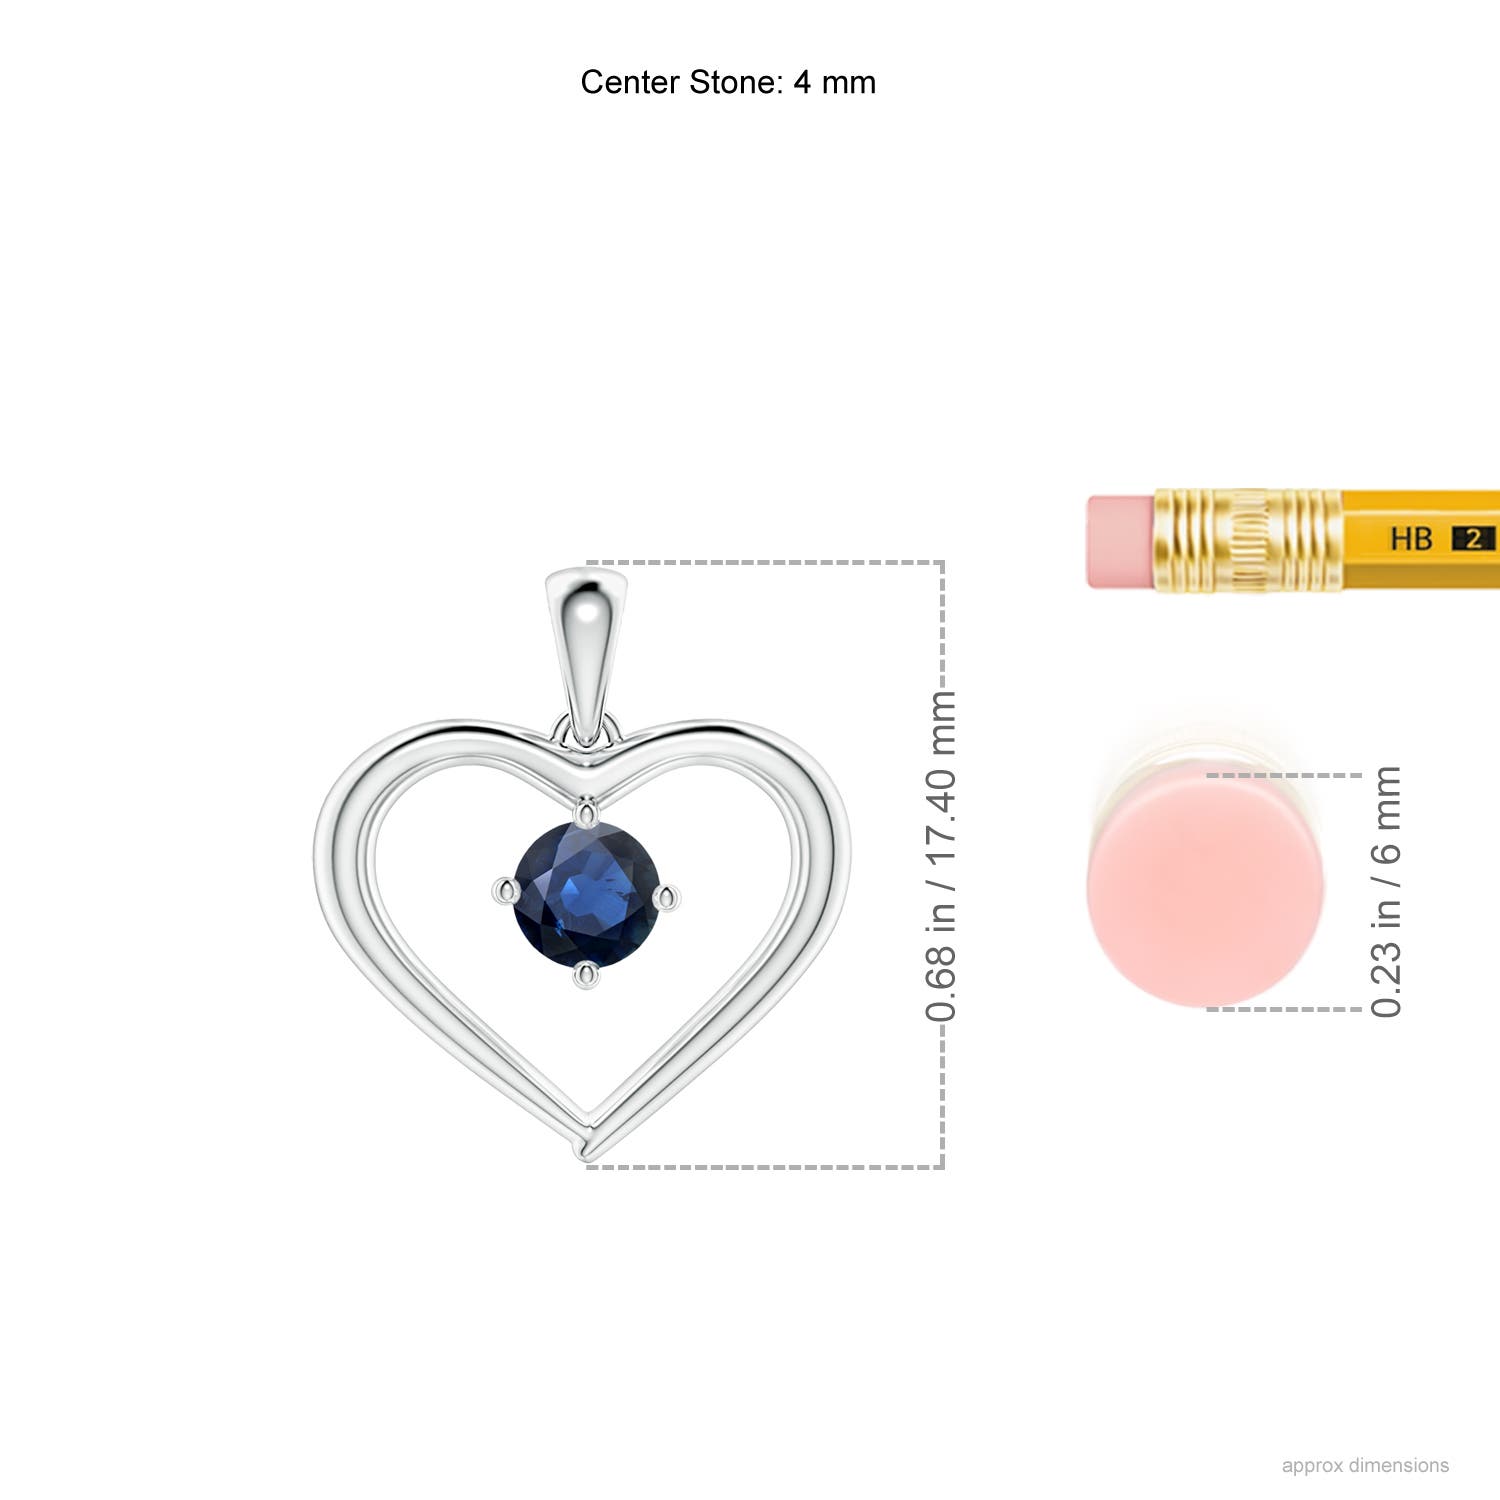 AA - Blue Sapphire / 0.33 CT / 14 KT White Gold